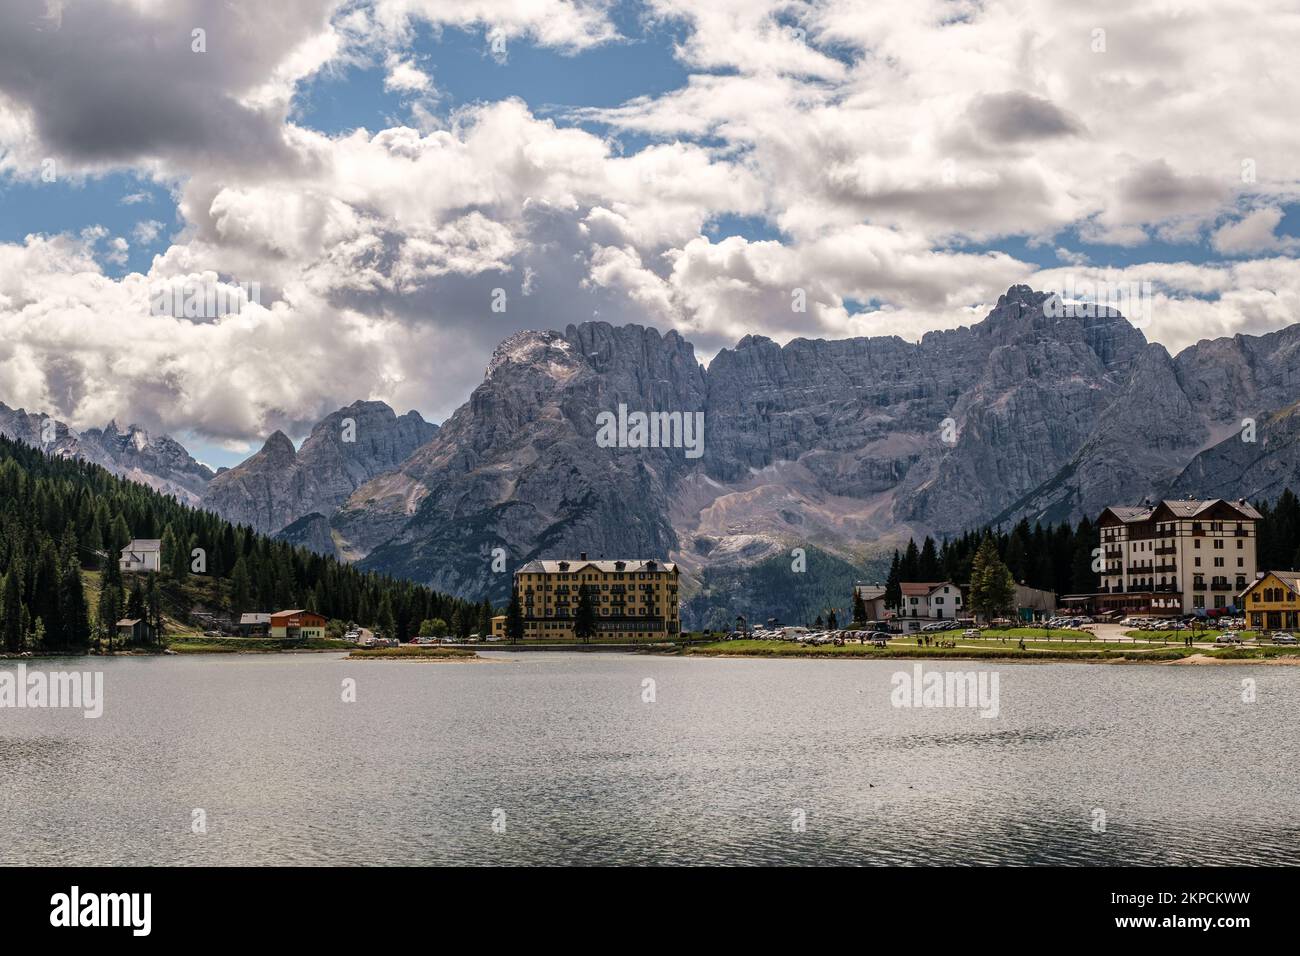 Great panoramic view at the Misurina lake near Cortina D'Ampezzo in the Dolomites mountains, South Tyrol, Italy Stock Photo